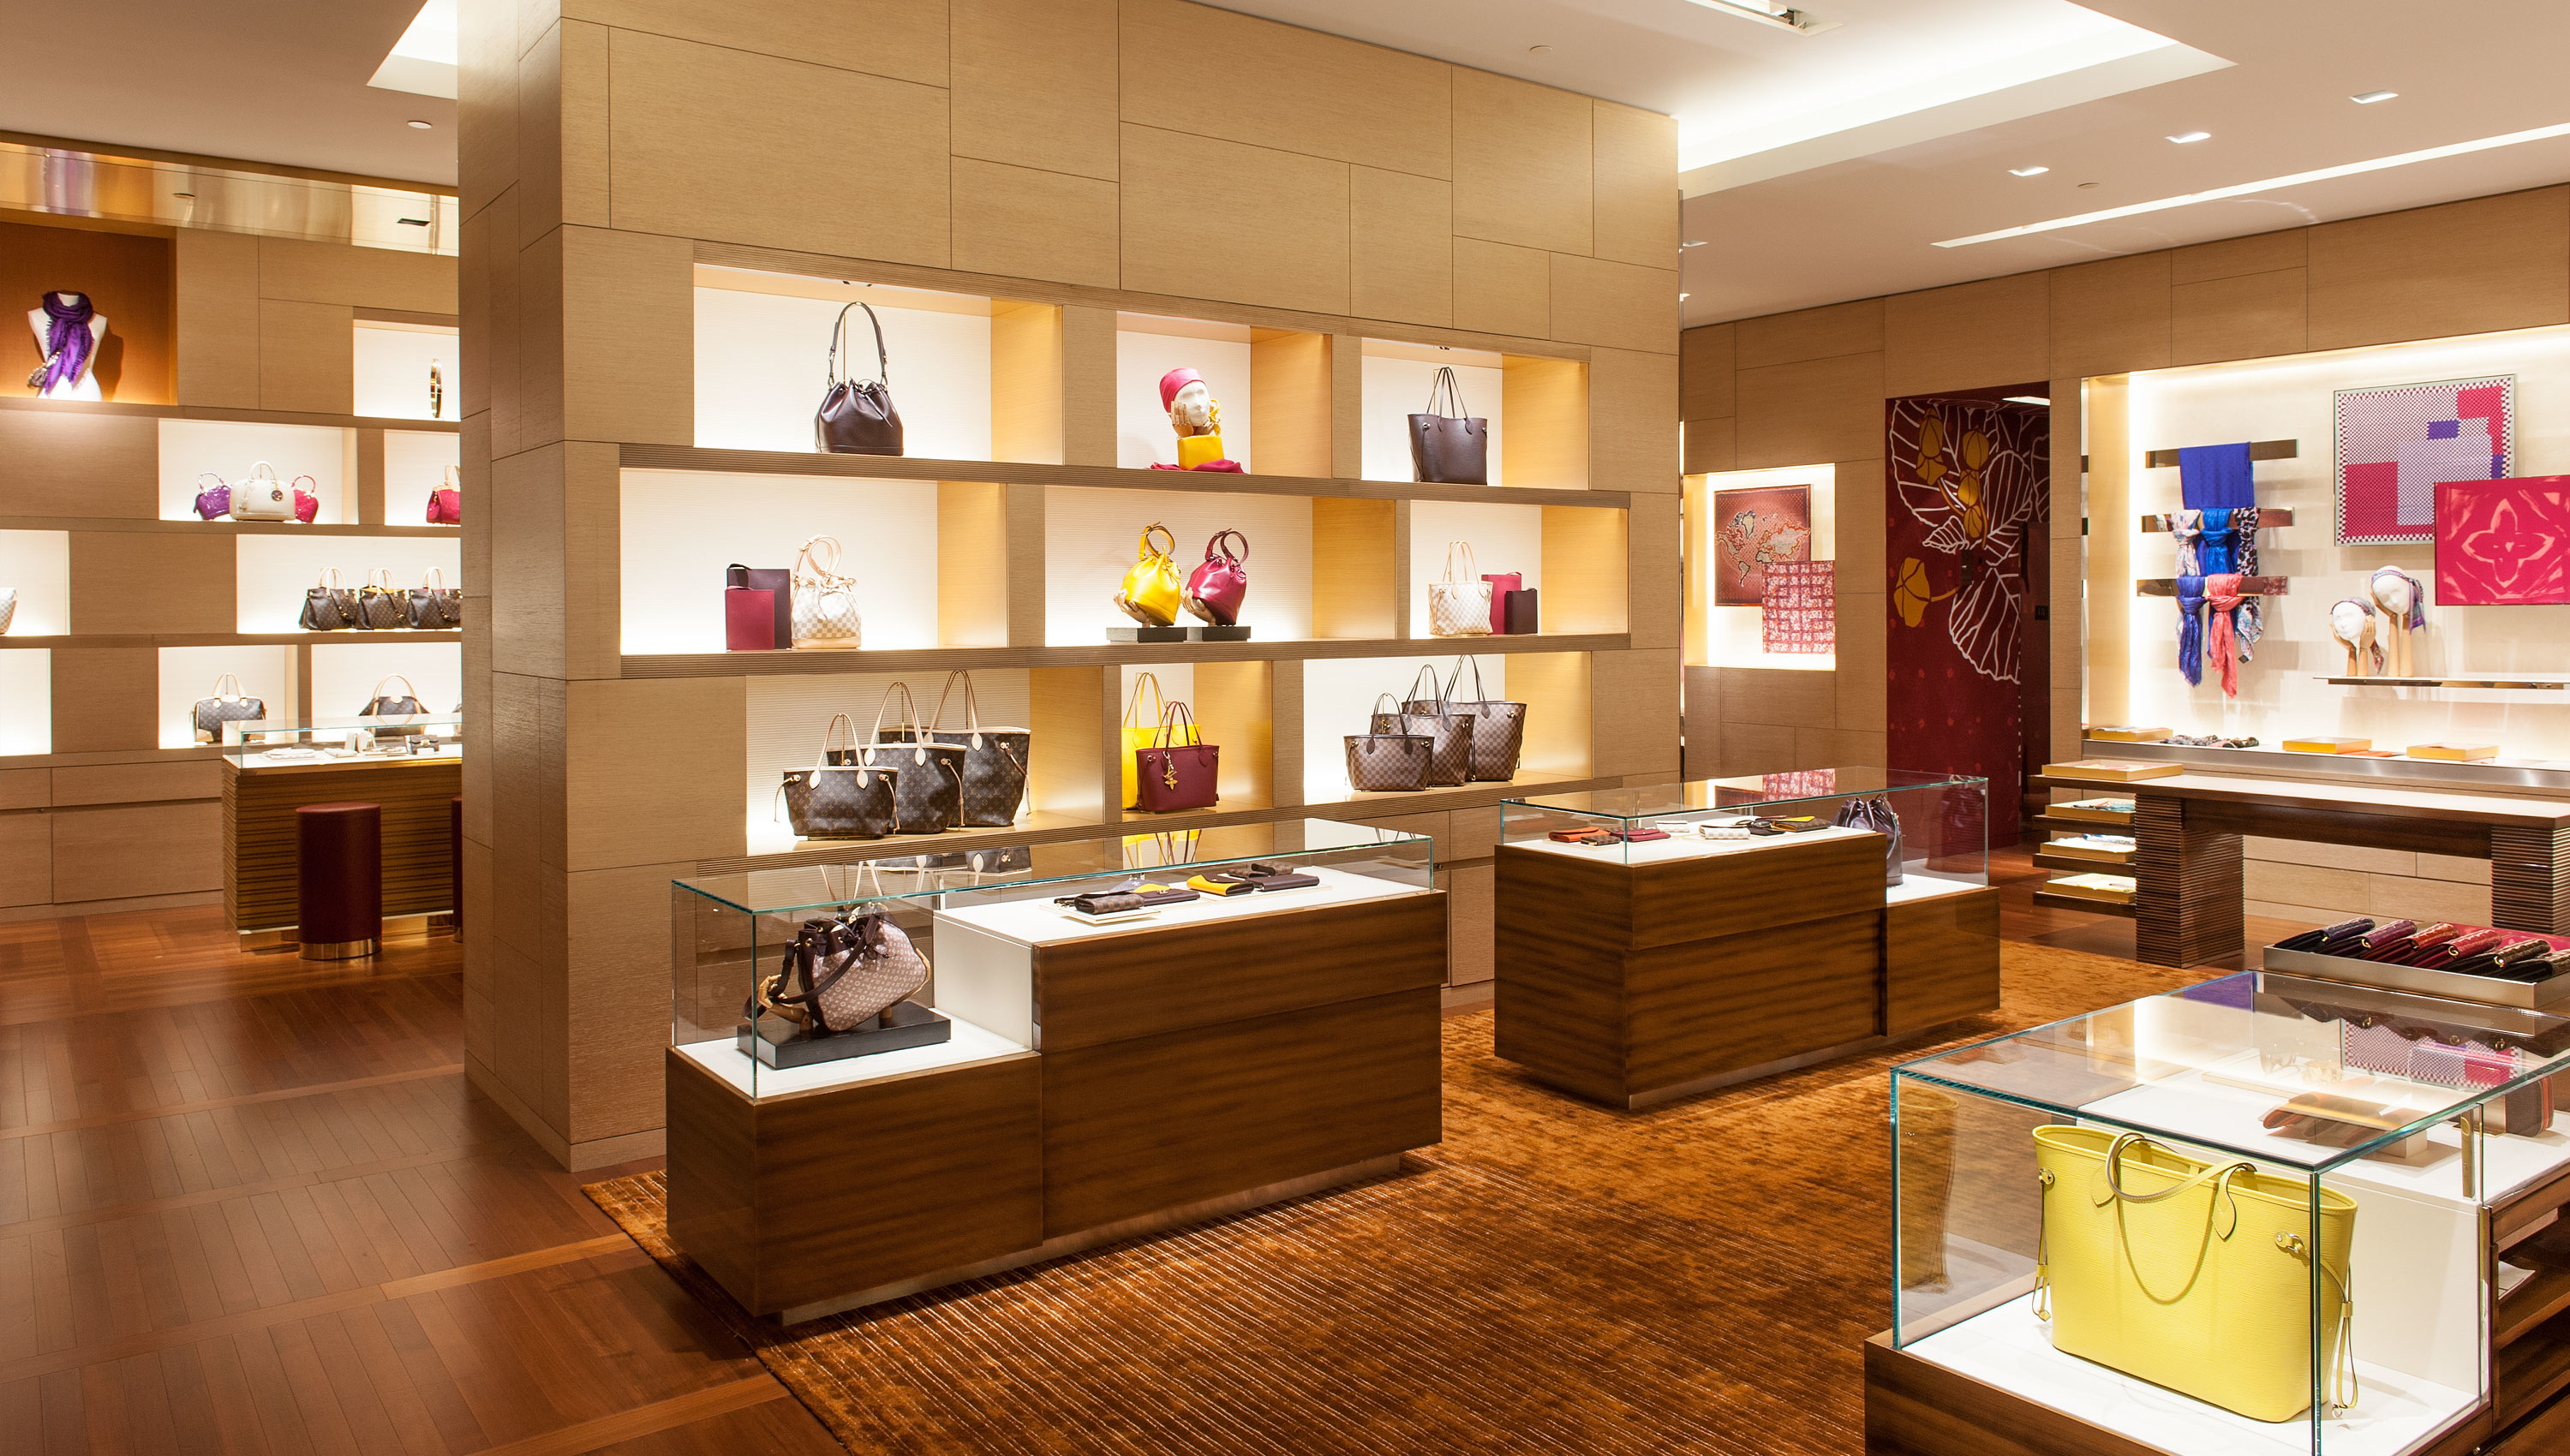 Louis Vuitton Honolulu Gump's Building - Leather Goods Store in